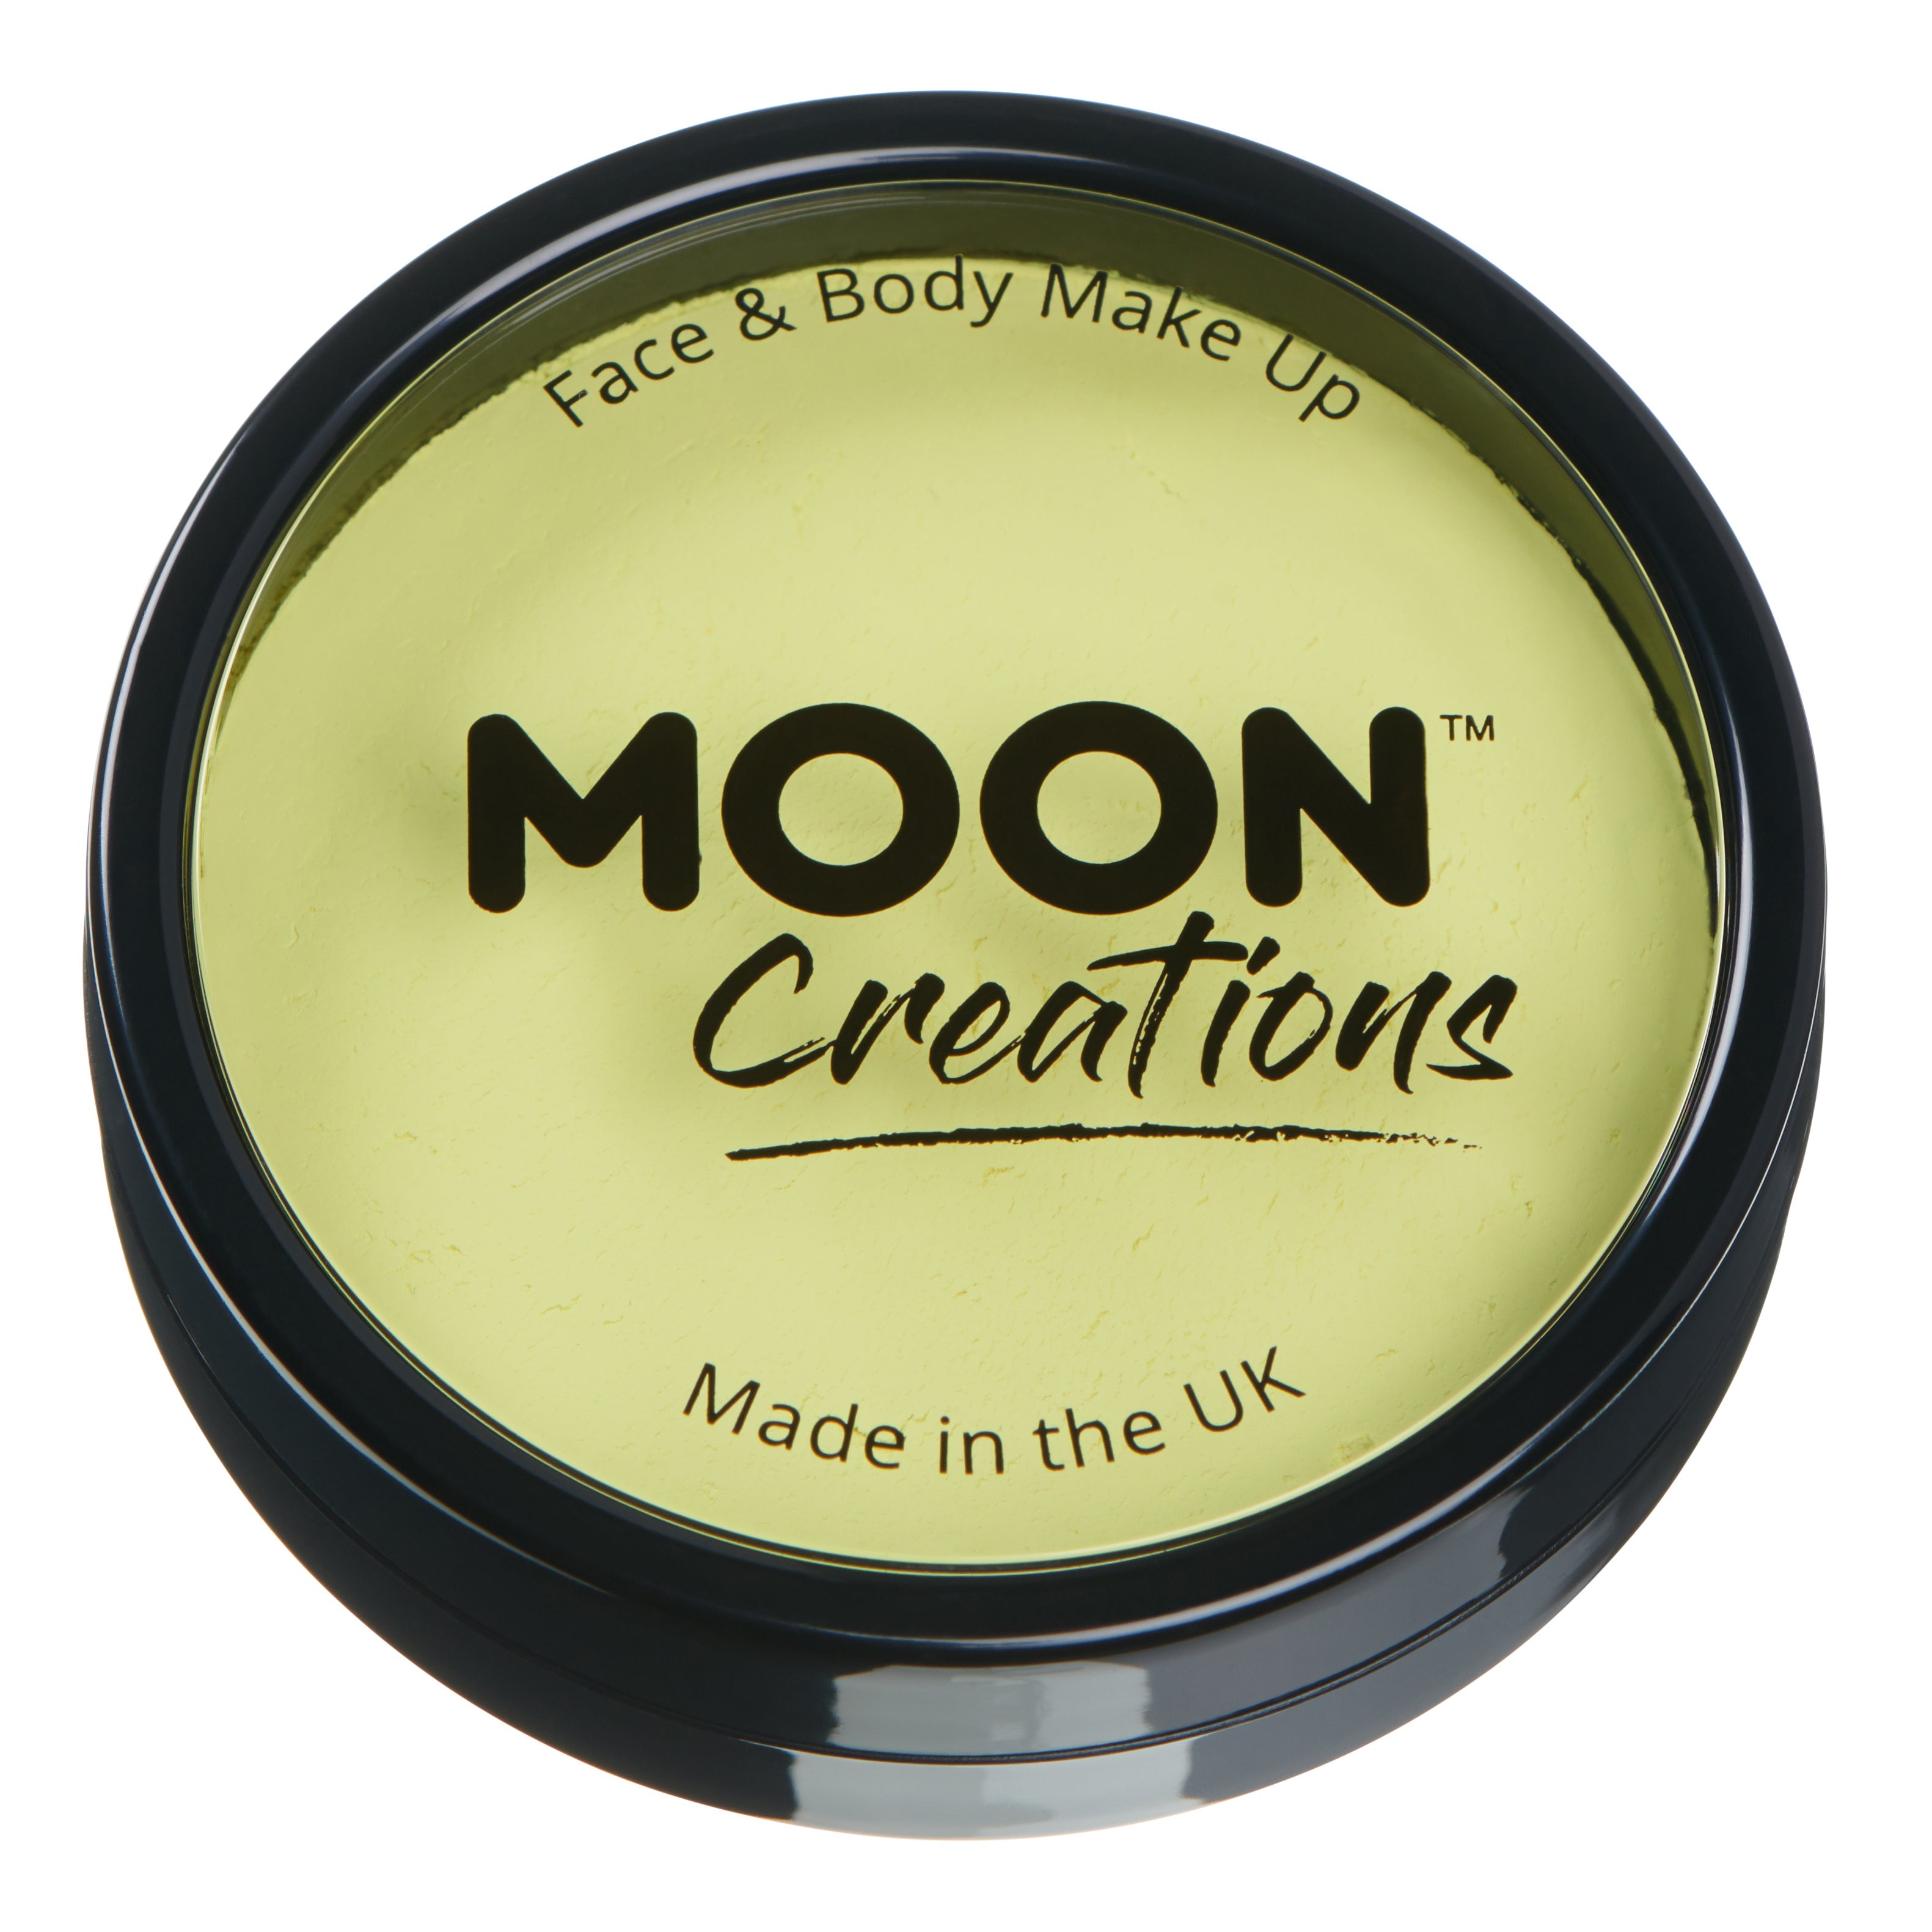 Light Yellow - Professional Face Paint, 36g. Cosmetically certified, FDA & Health Canada compliant, cruelty free and vegan.